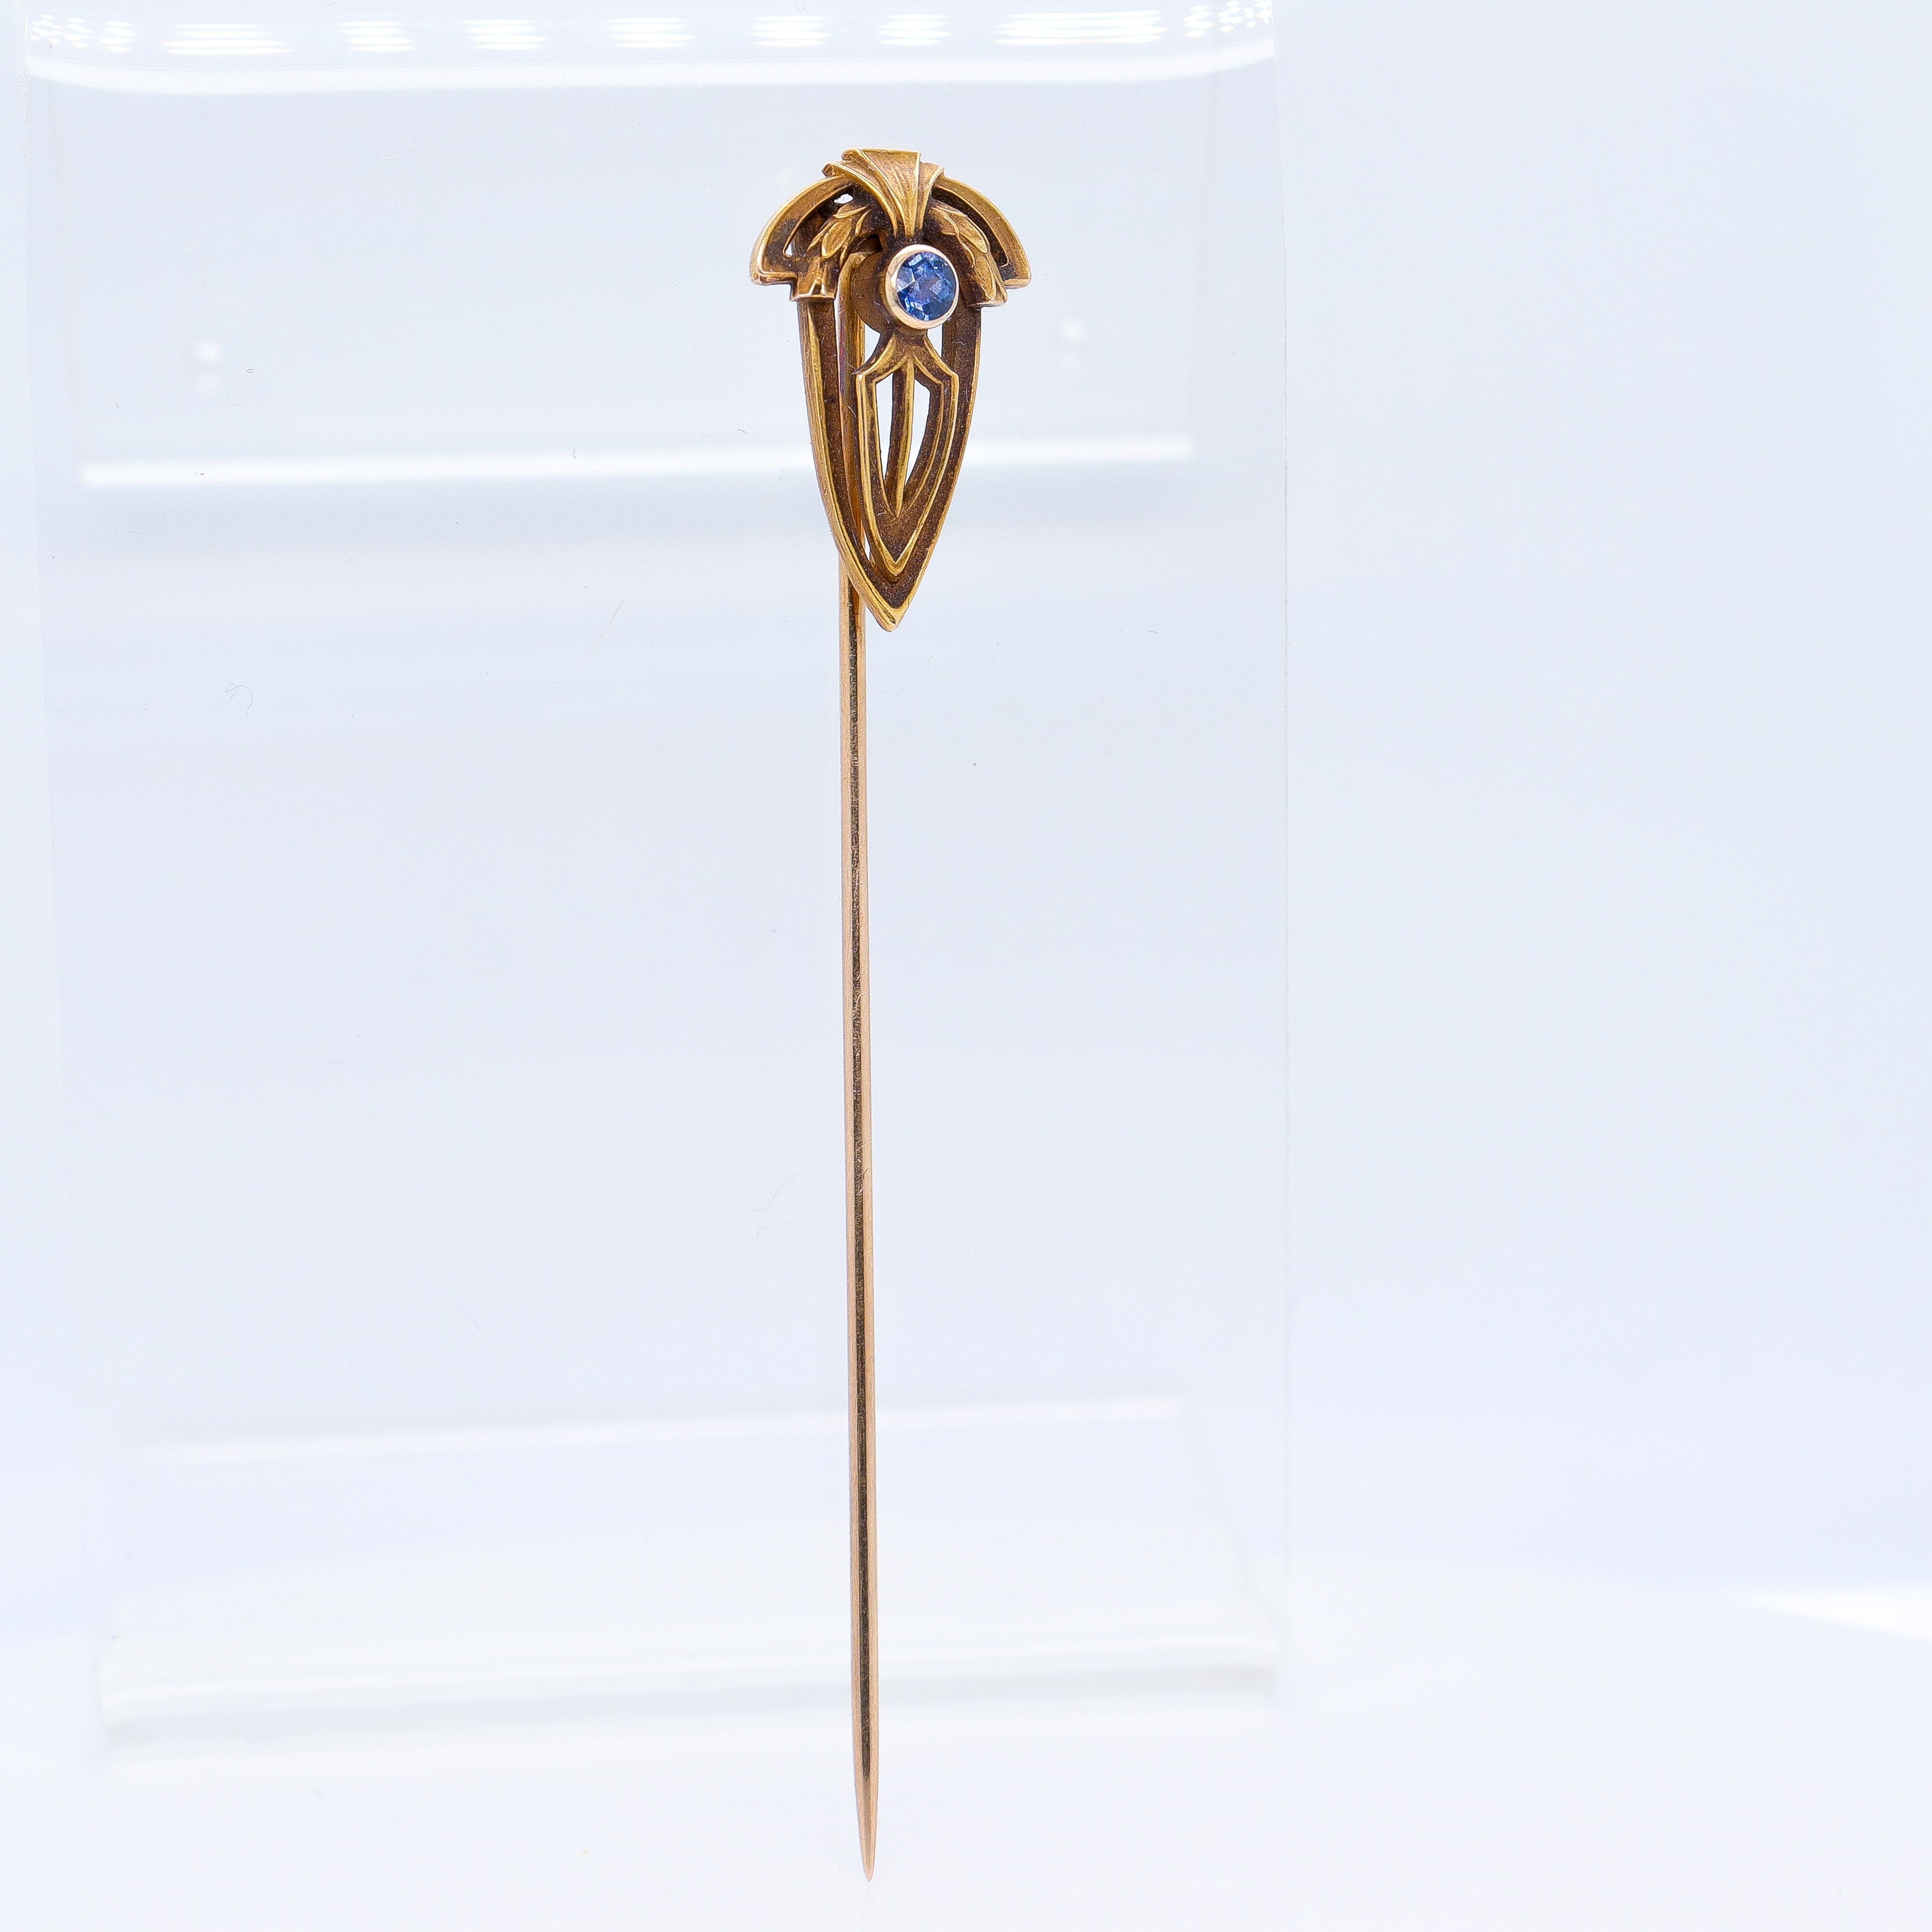 A fine antique Edwardian gold & blue topaz stickpin.

In 14K gold.

Set with a round faceted blue topaz gemstone in a geometric head.

Marked to the reverse with Alling & Co's maker's mark & 14.

Simply a wonderful Edwardian stickpin!

Date:
Early